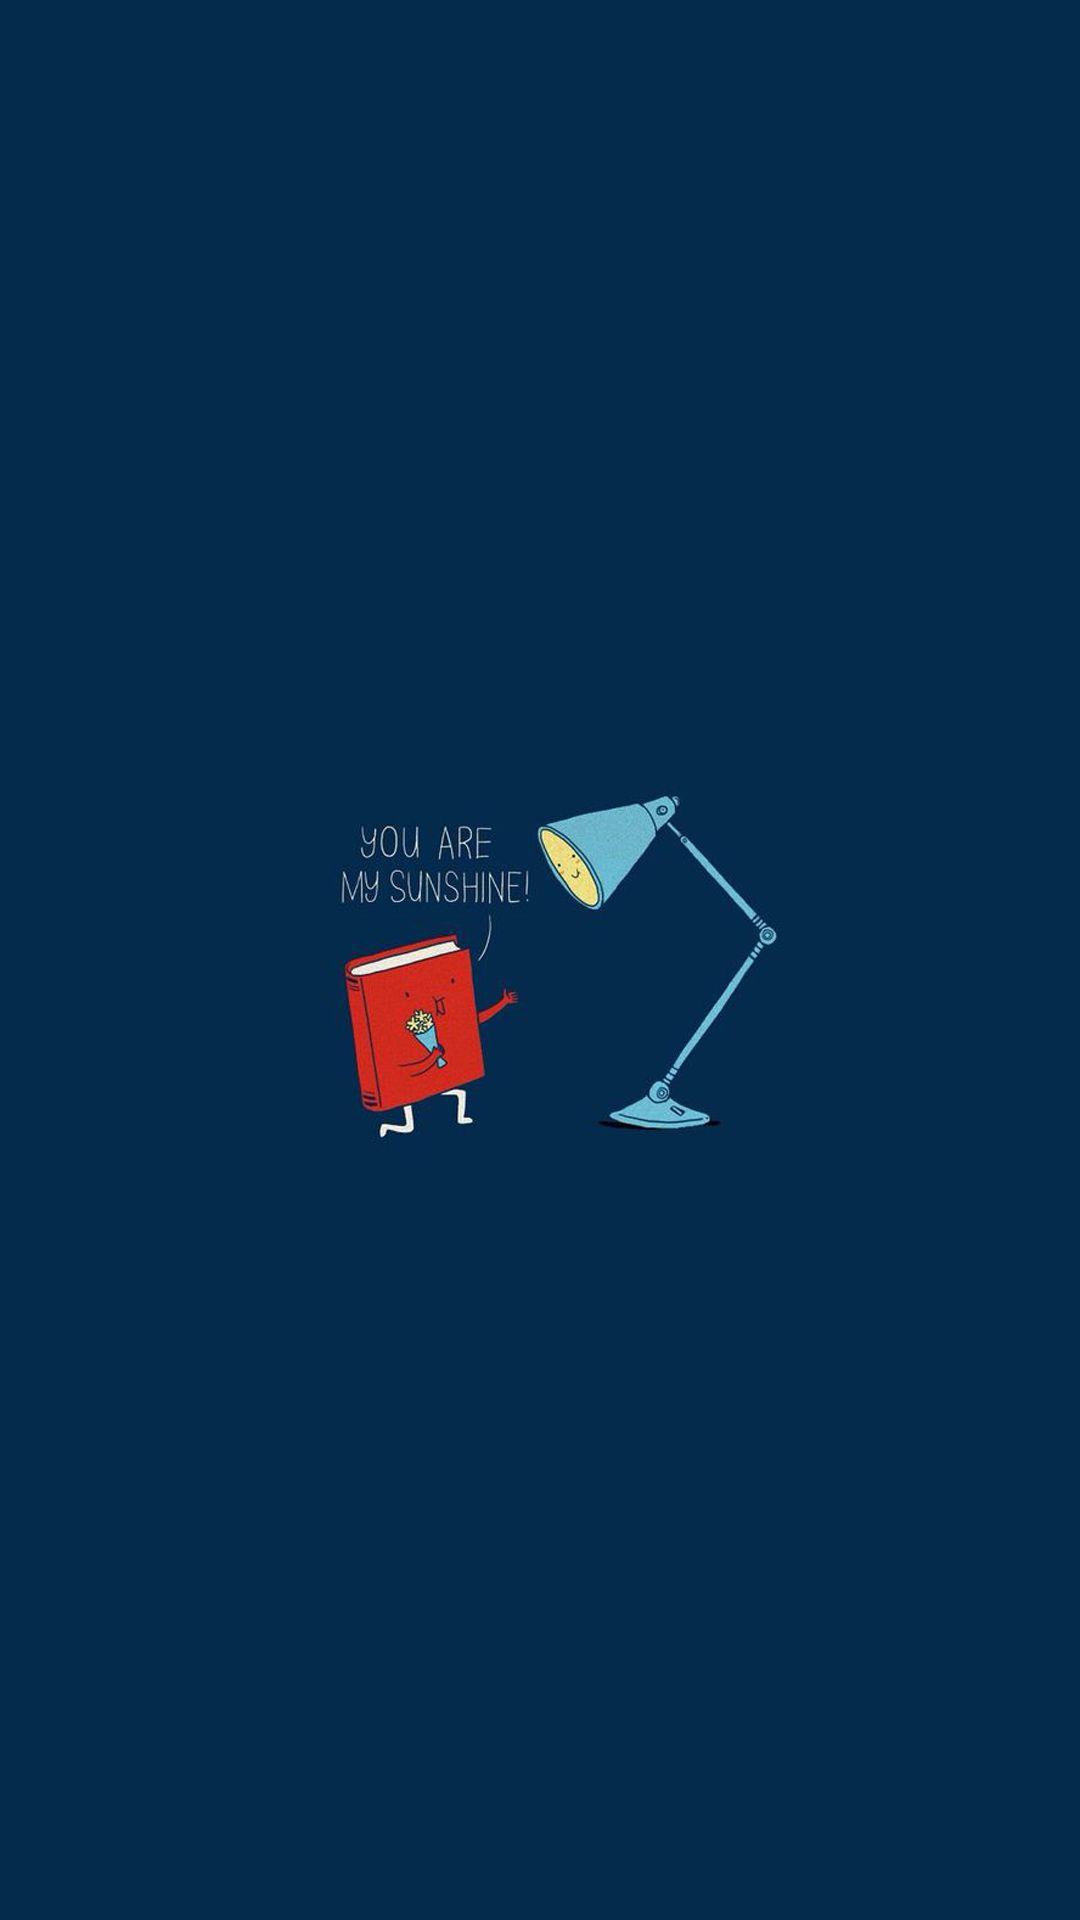 Book Lamp You Are My Sunshine Android Wallpaper. iPhone wallpaper tumblr aesthetic, Aesthetic iphone wallpaper, Best wallpaper android